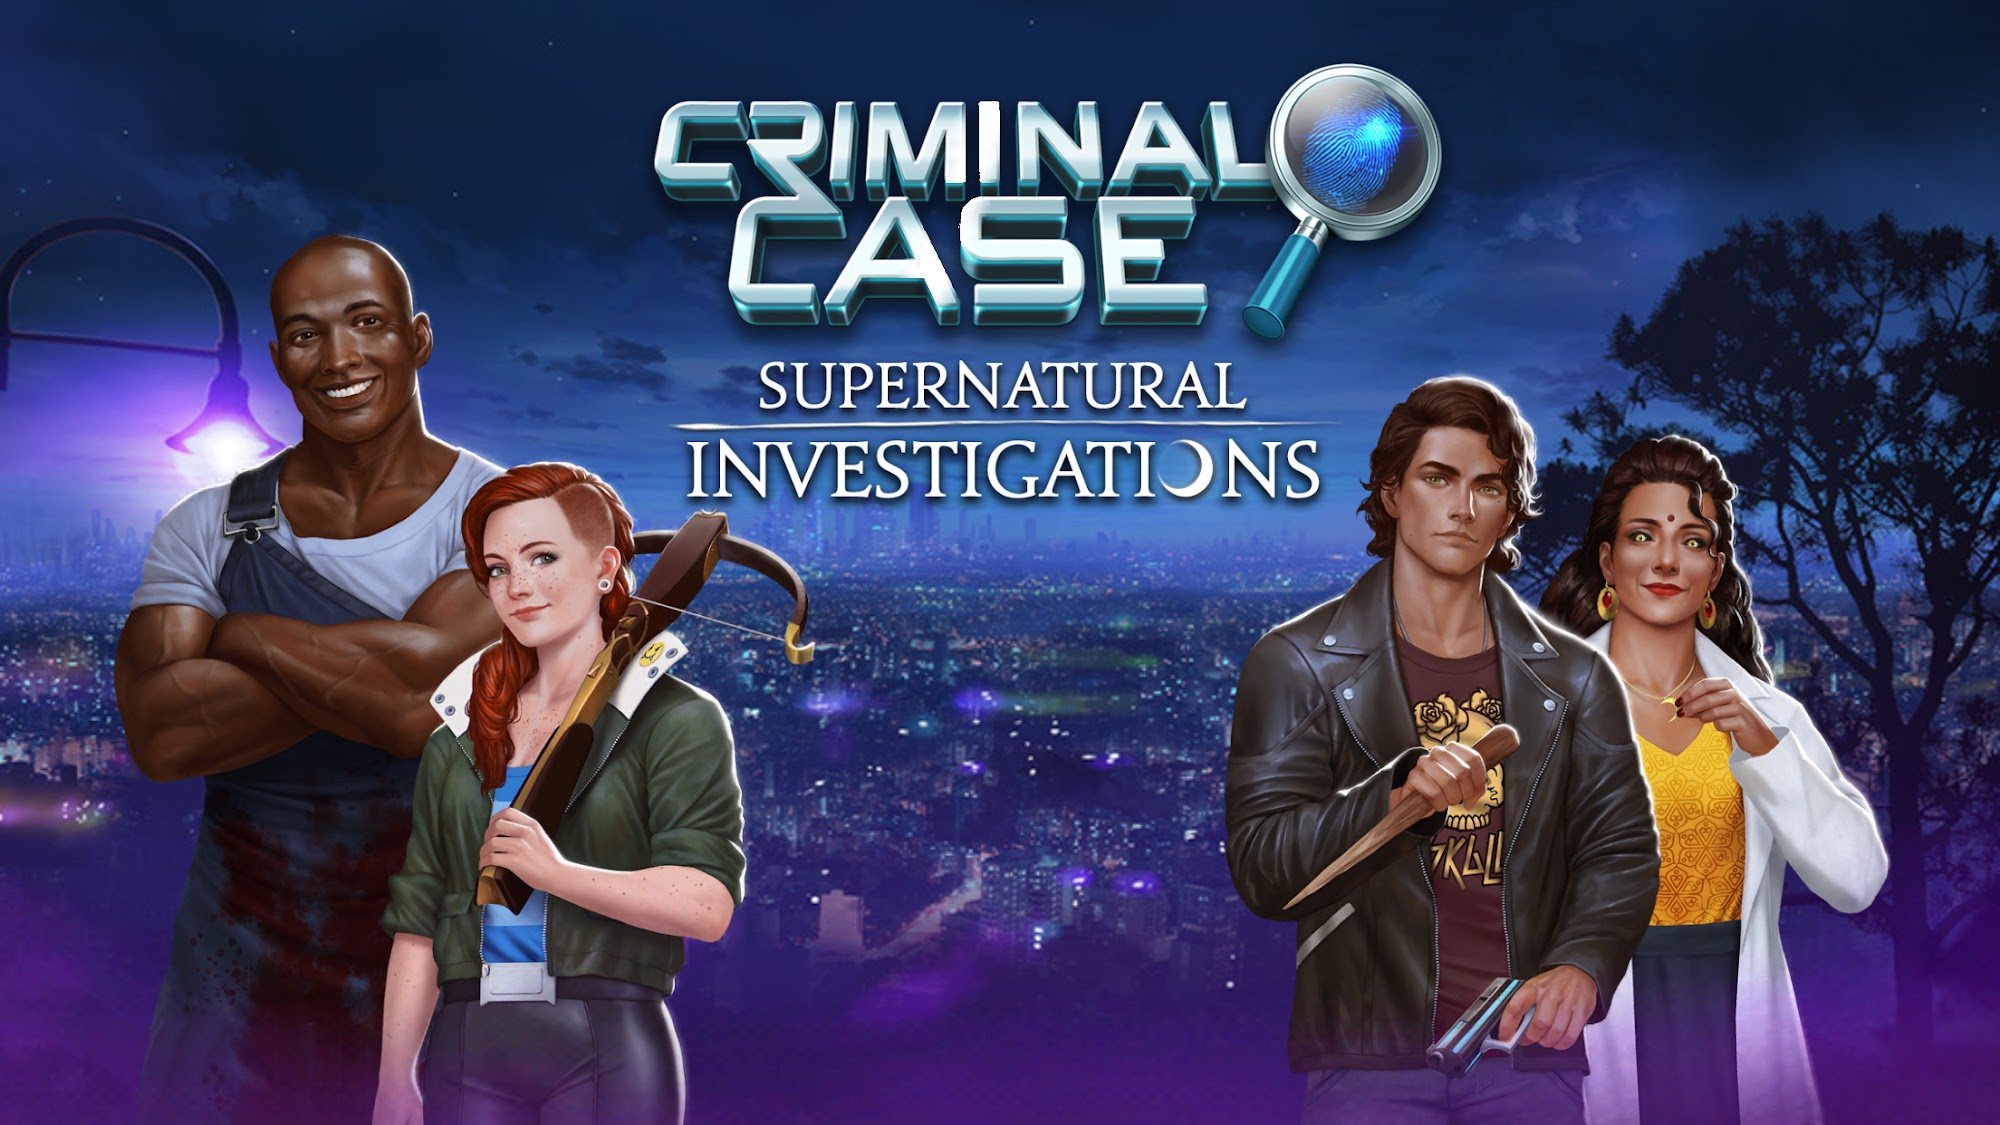 Full version of Android Hidden objects game apk Criminal Case: Supernatural Investigations for tablet and phone.